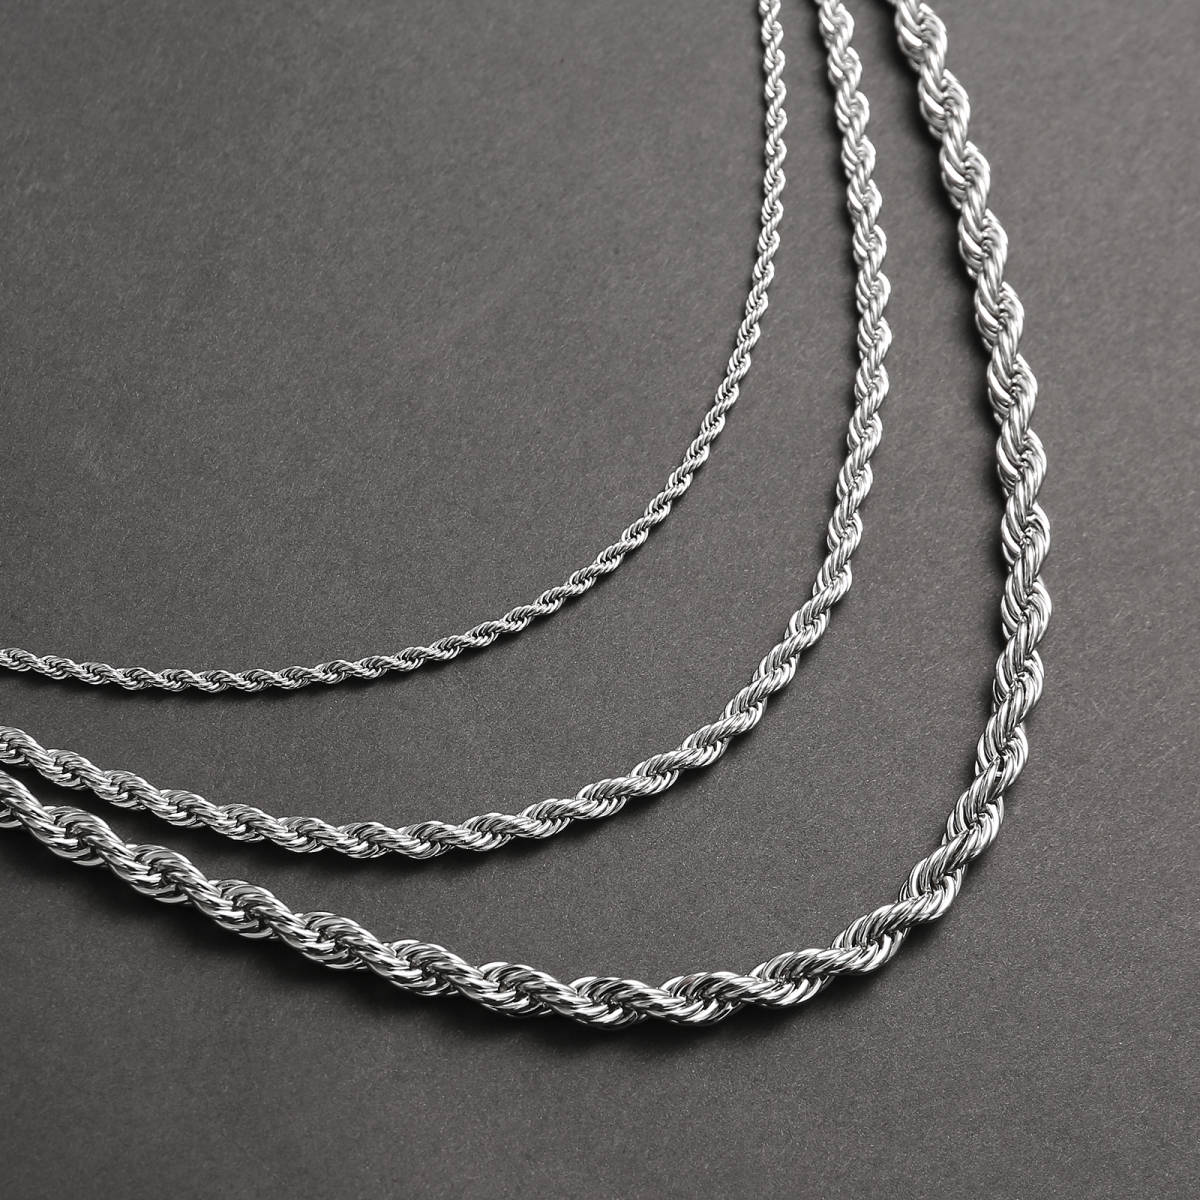 Twist Chain Silver 3mm/5mm/7mm-NORSECOLLECTION- Viking Jewelry,Viking Necklace,Viking Bracelet,Viking Rings,Viking Mugs,Viking Accessories,Viking Crafts